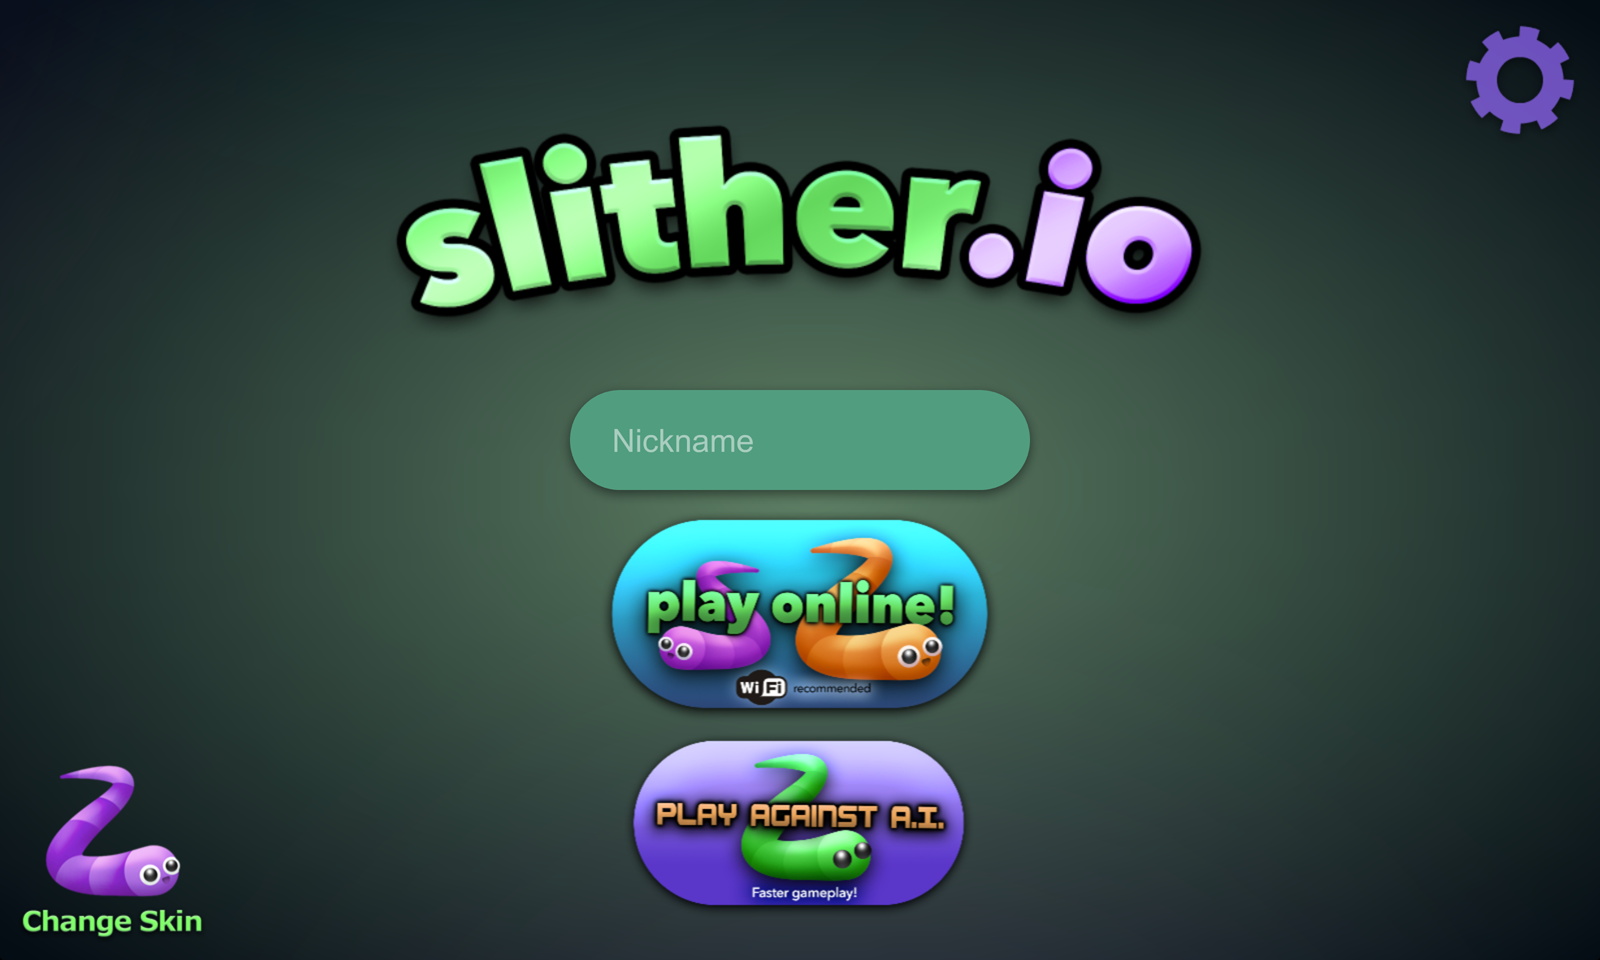 Slither.io for PC Online - Free Download (Windows 7, 8, 8.1, 10)